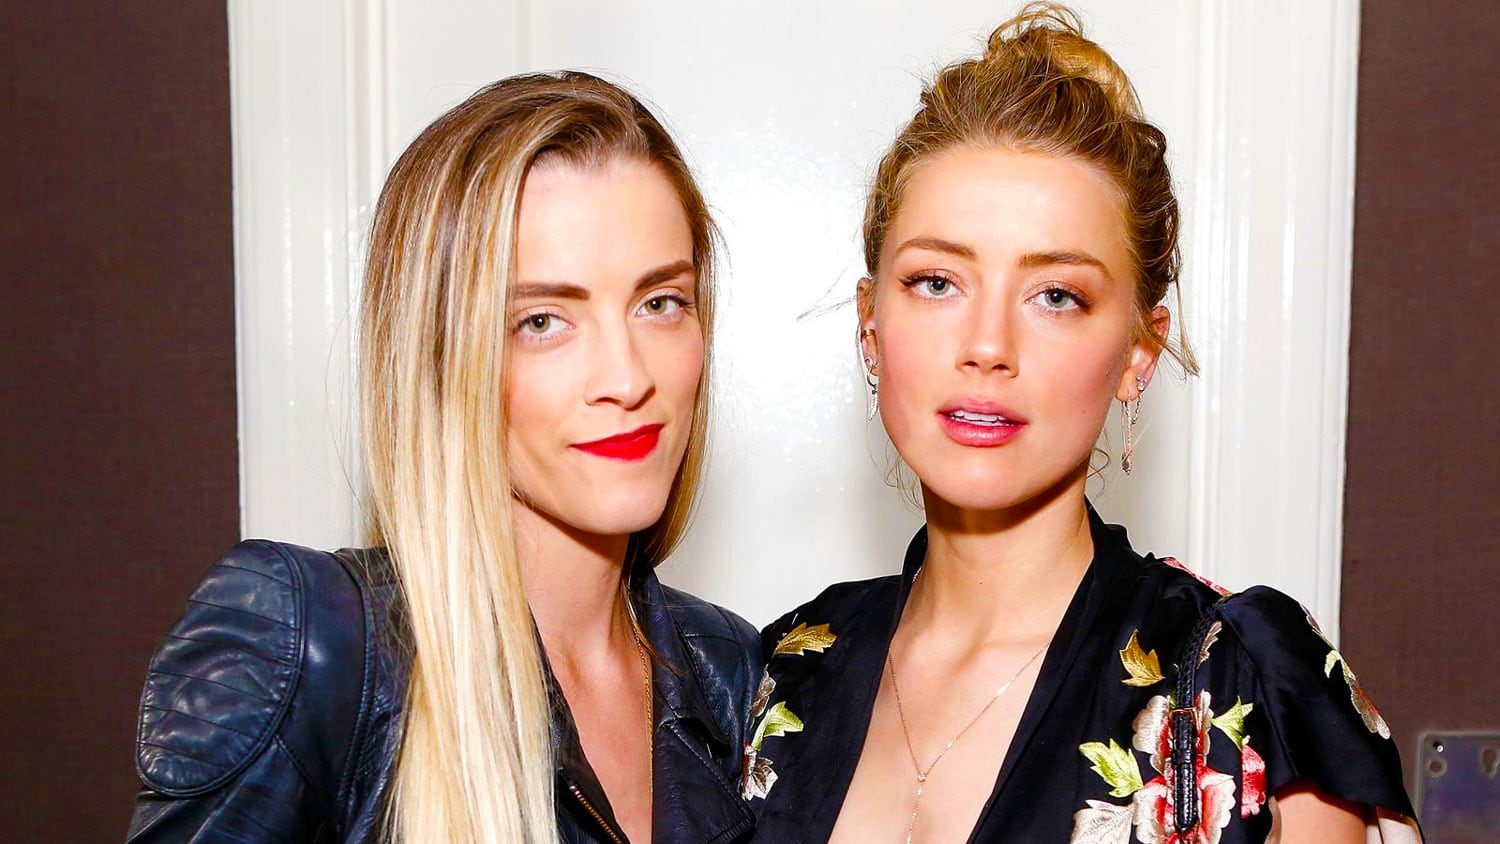 Amber-Heard-Sister-Reportedly-Lied-In-Johnny-Depp-UK-Trial